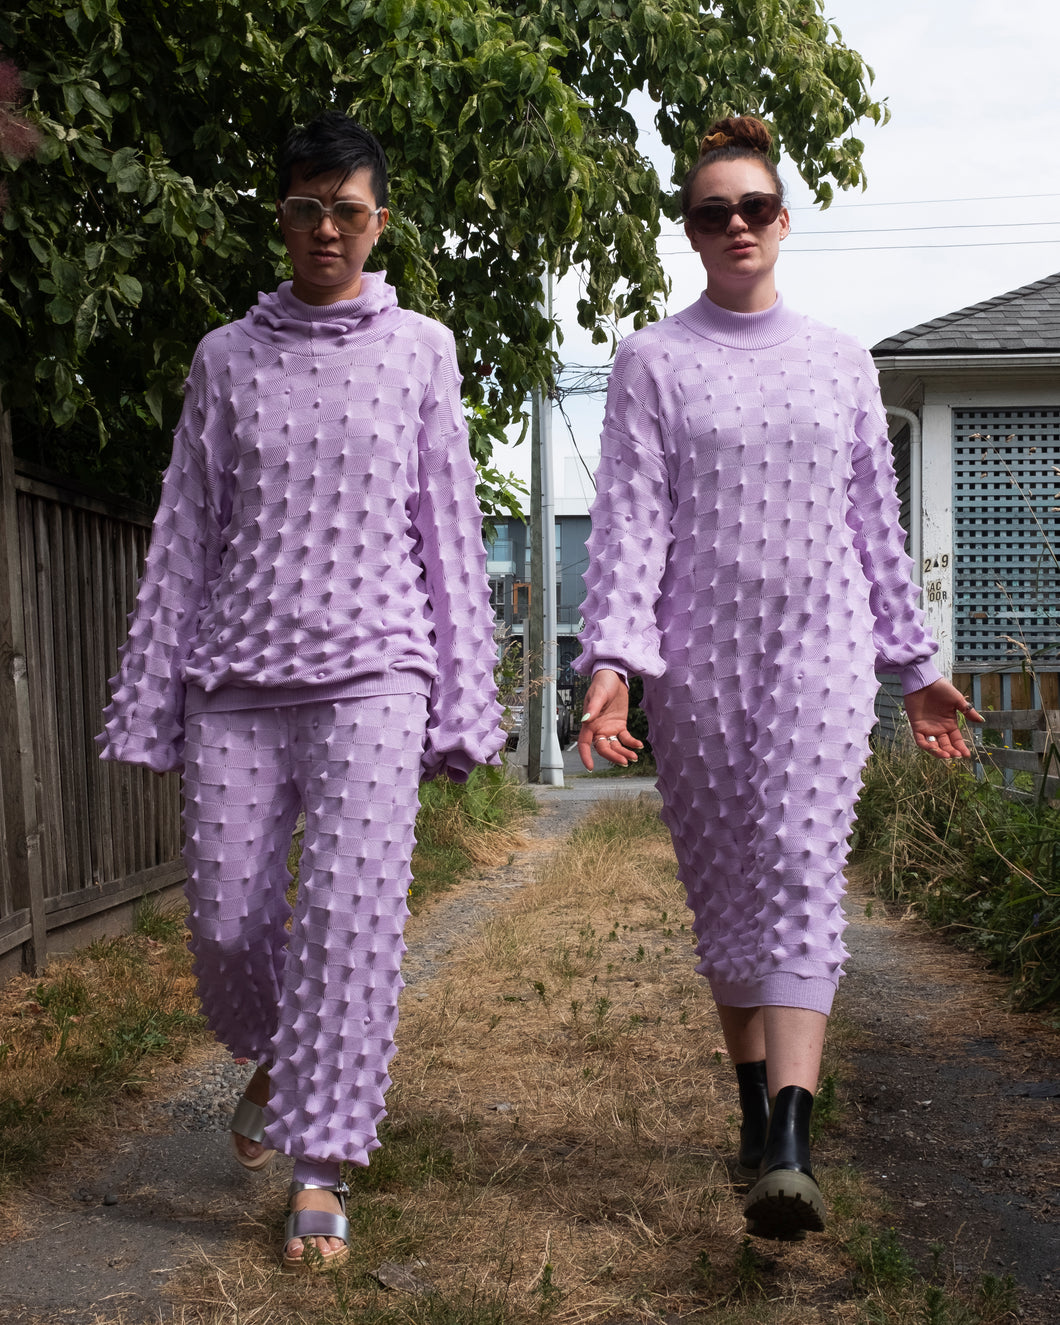 Mac and Jamie walking down the alley with attitude in the lavender Spike hoodie, Spike pants and Spike dress.